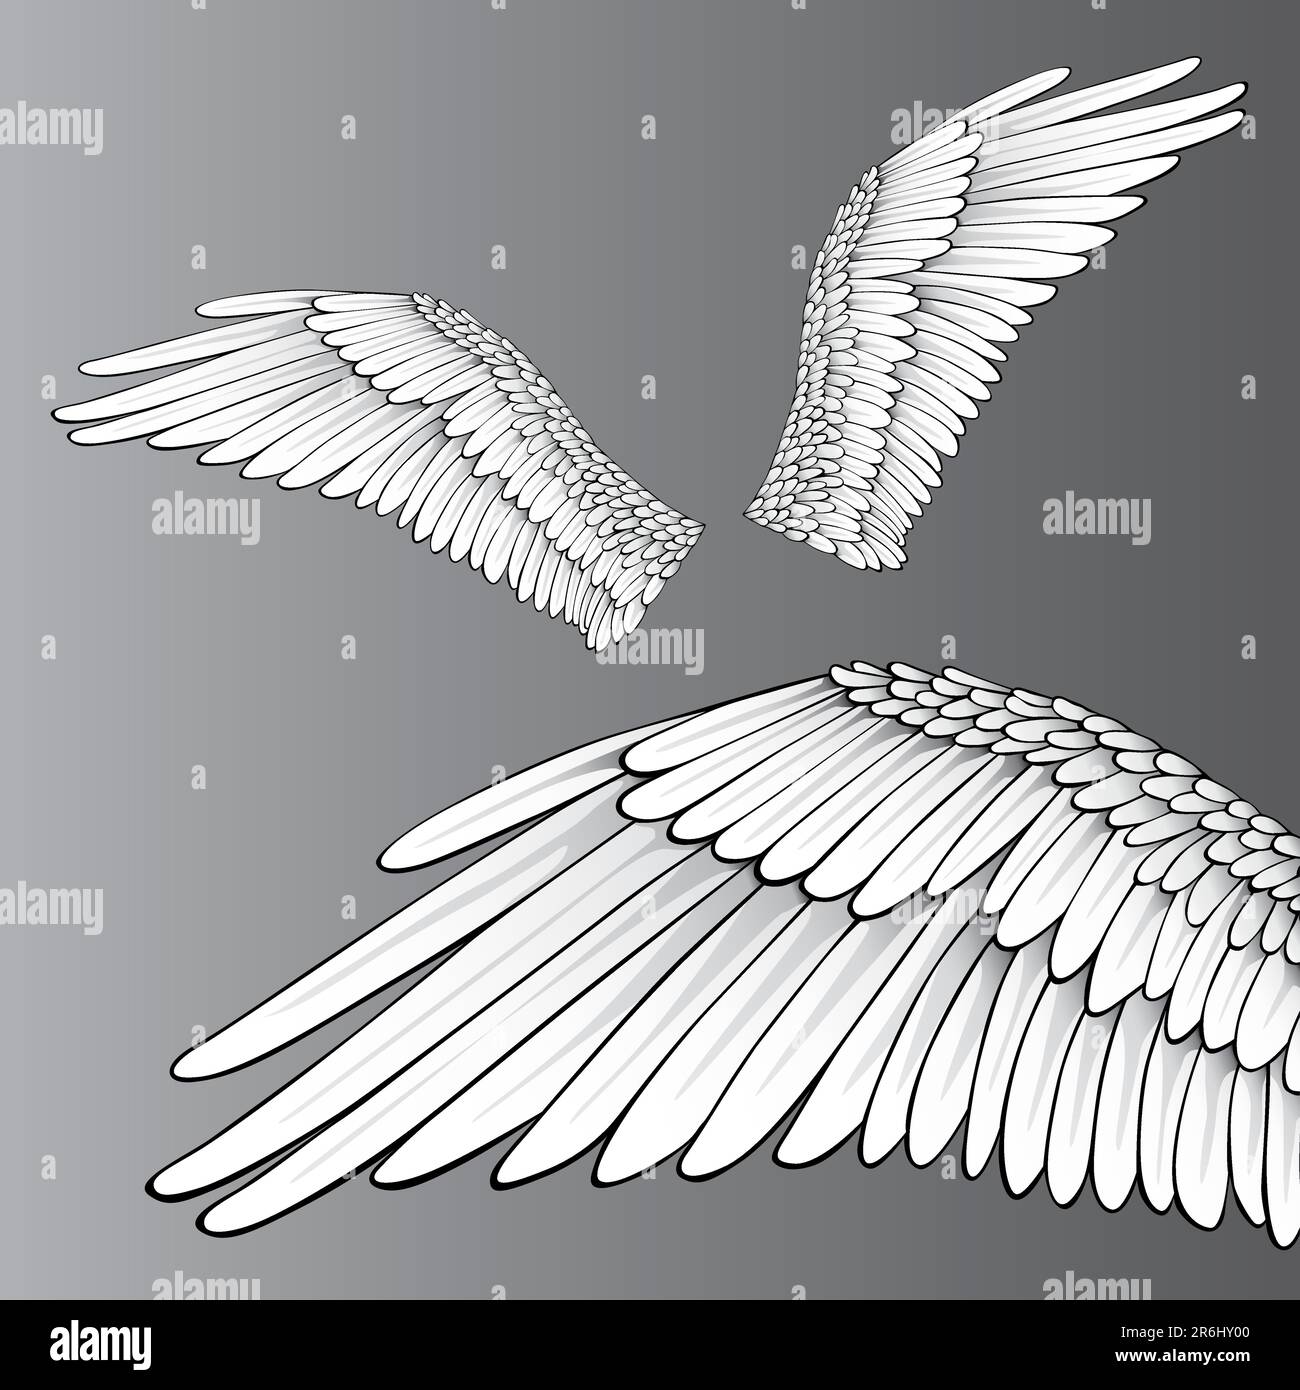 Wings (Realistic Illustration / Design Elements) Stock Vector